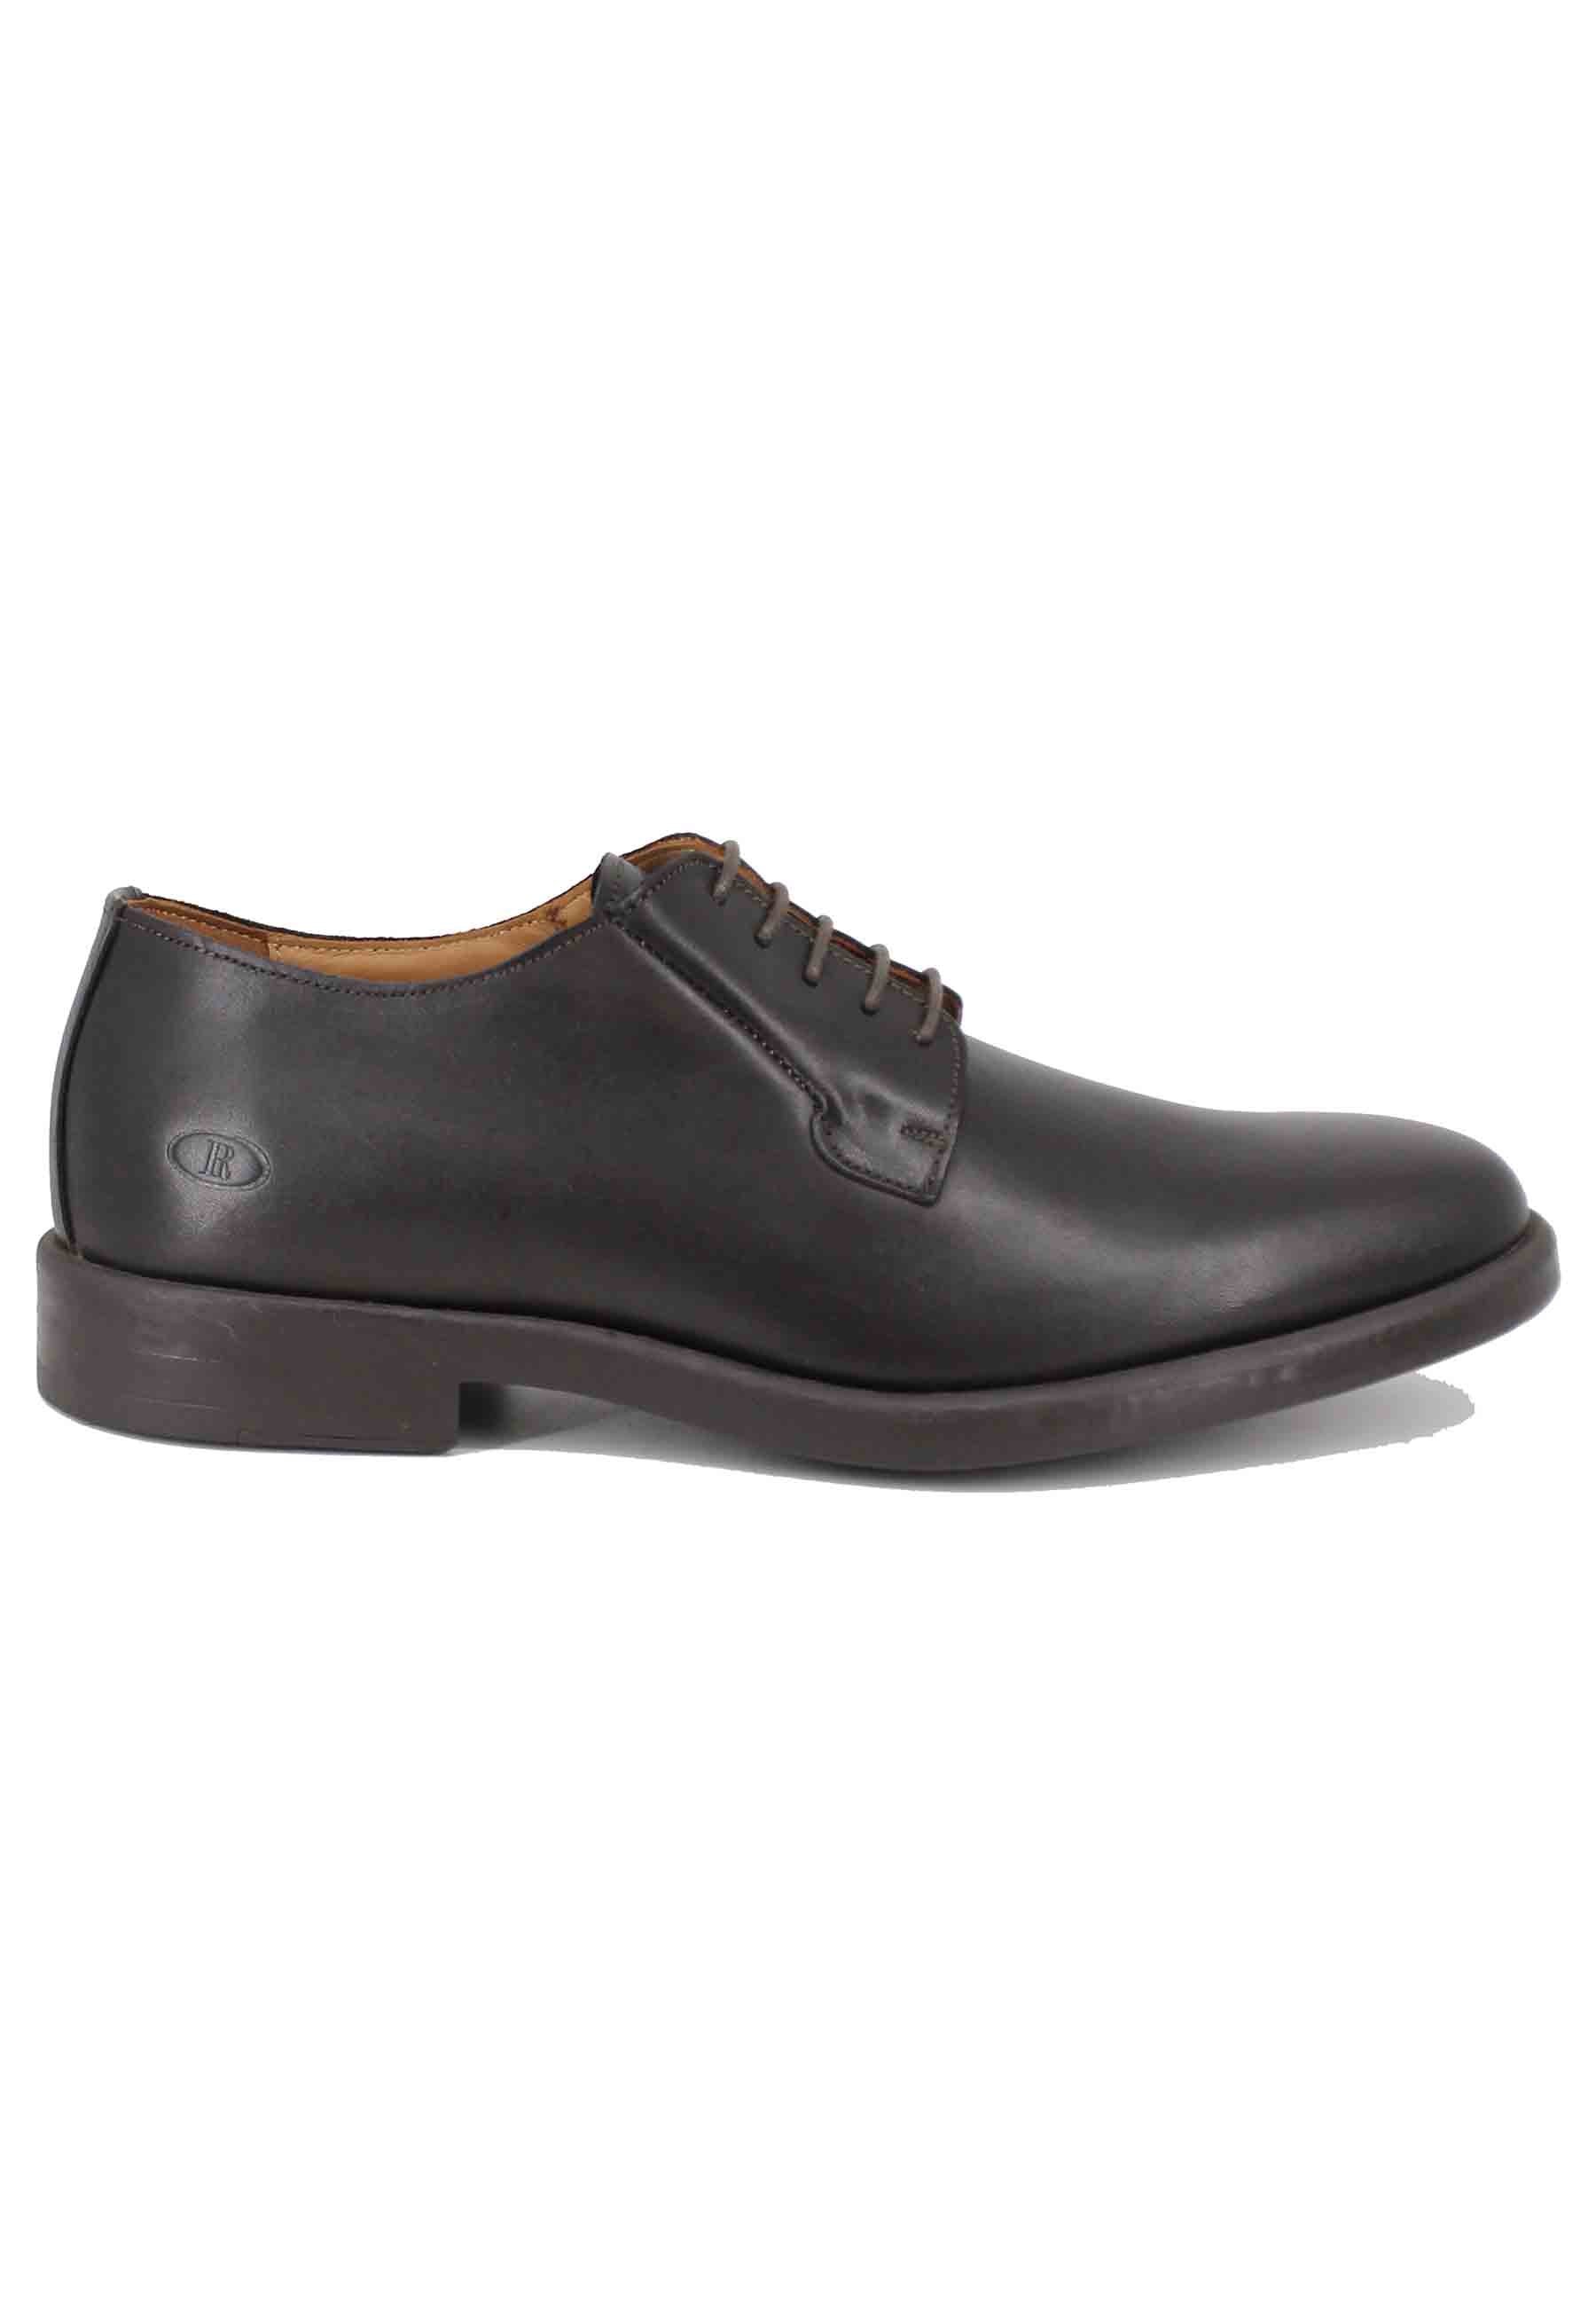 Men's lace-ups in brown leather with rubber sole